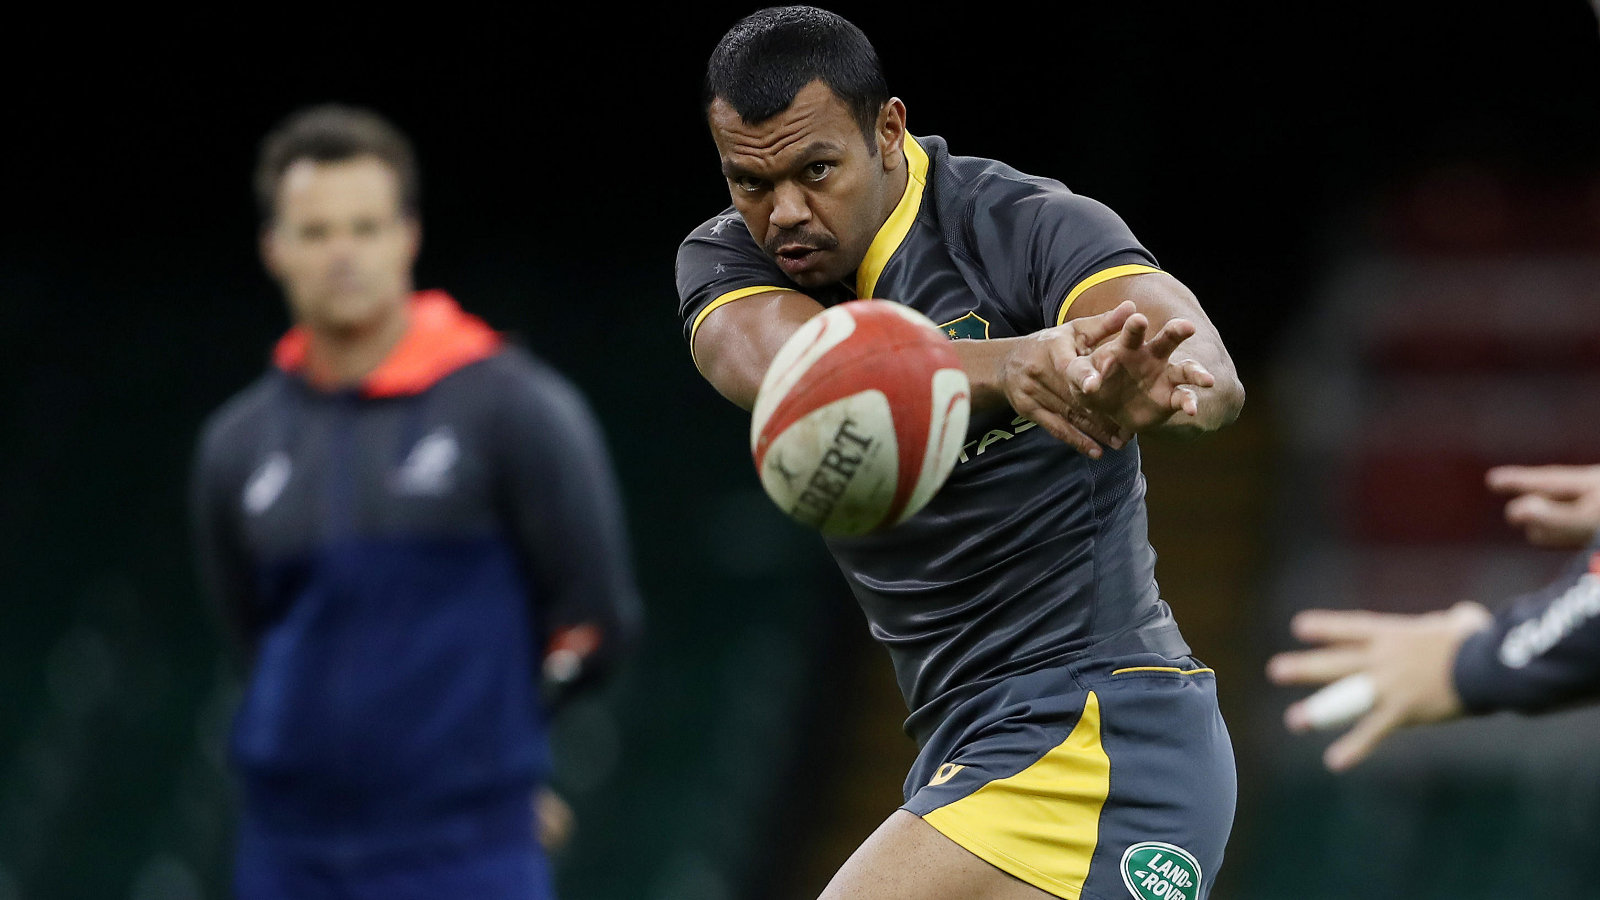 ‘he makes people around him better’ – ex-wallabies back kurtley beale to help struggling force